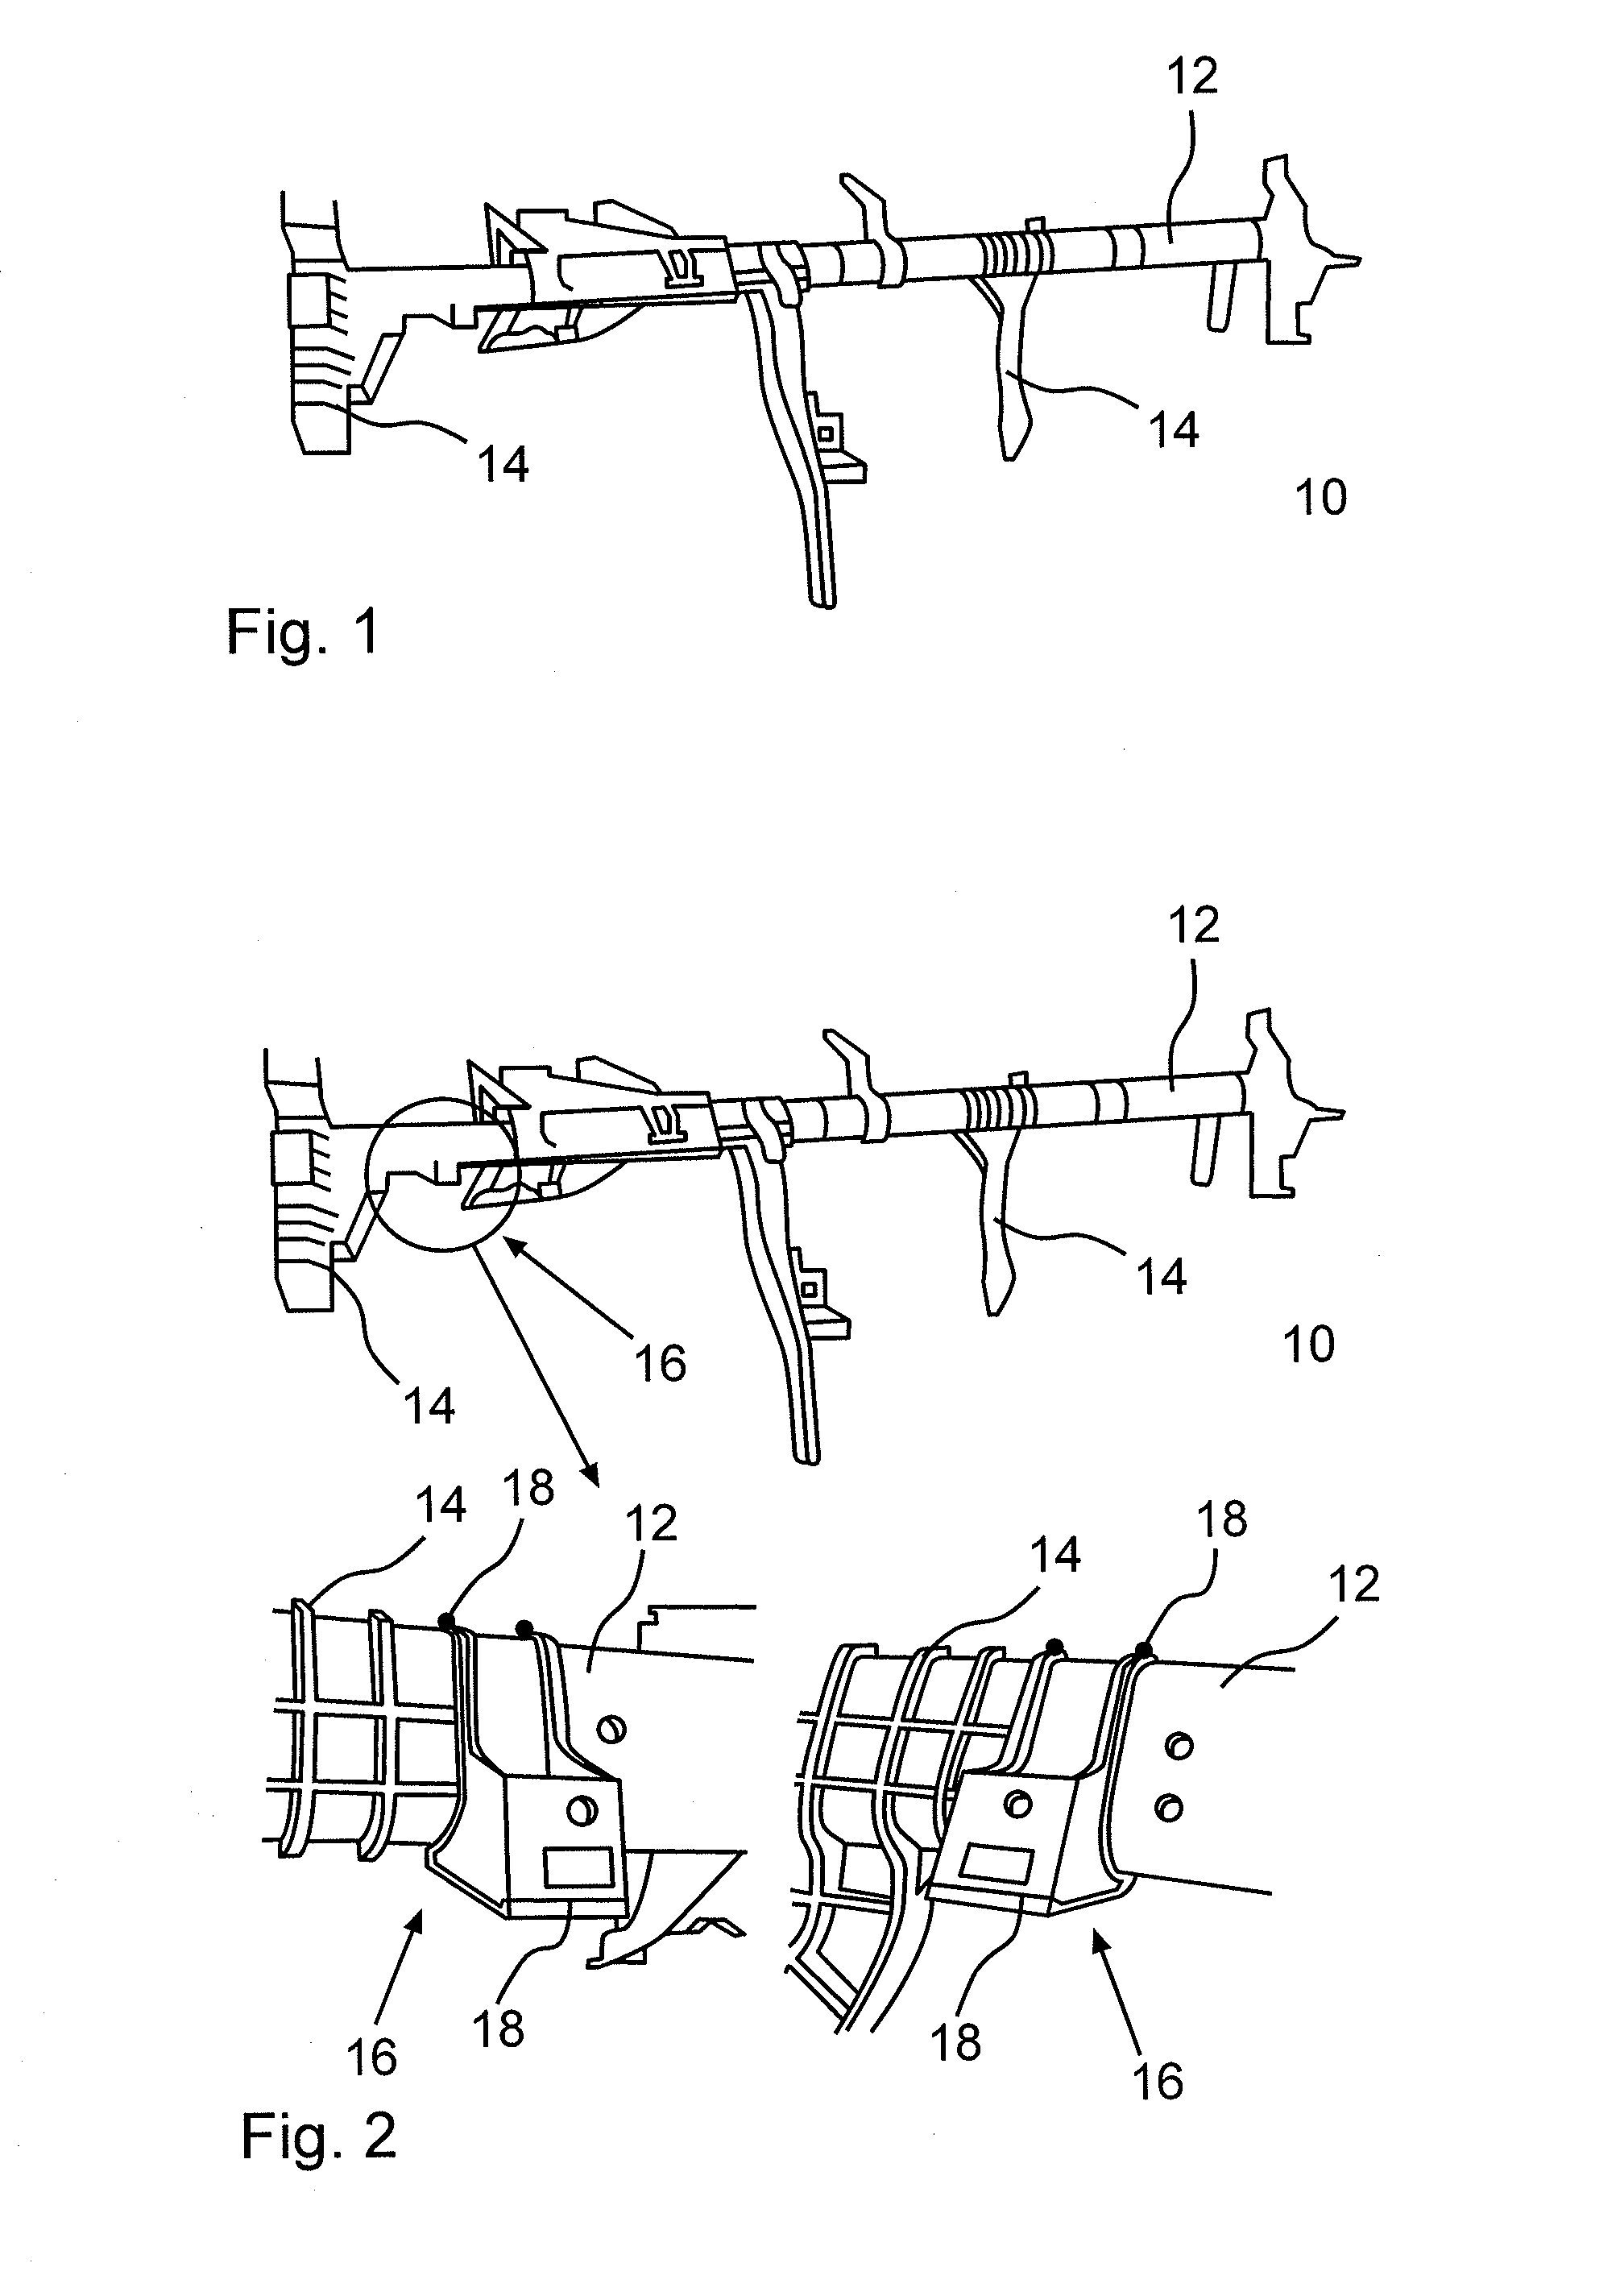 Hybrid component and method for manufacturing a hybrid component